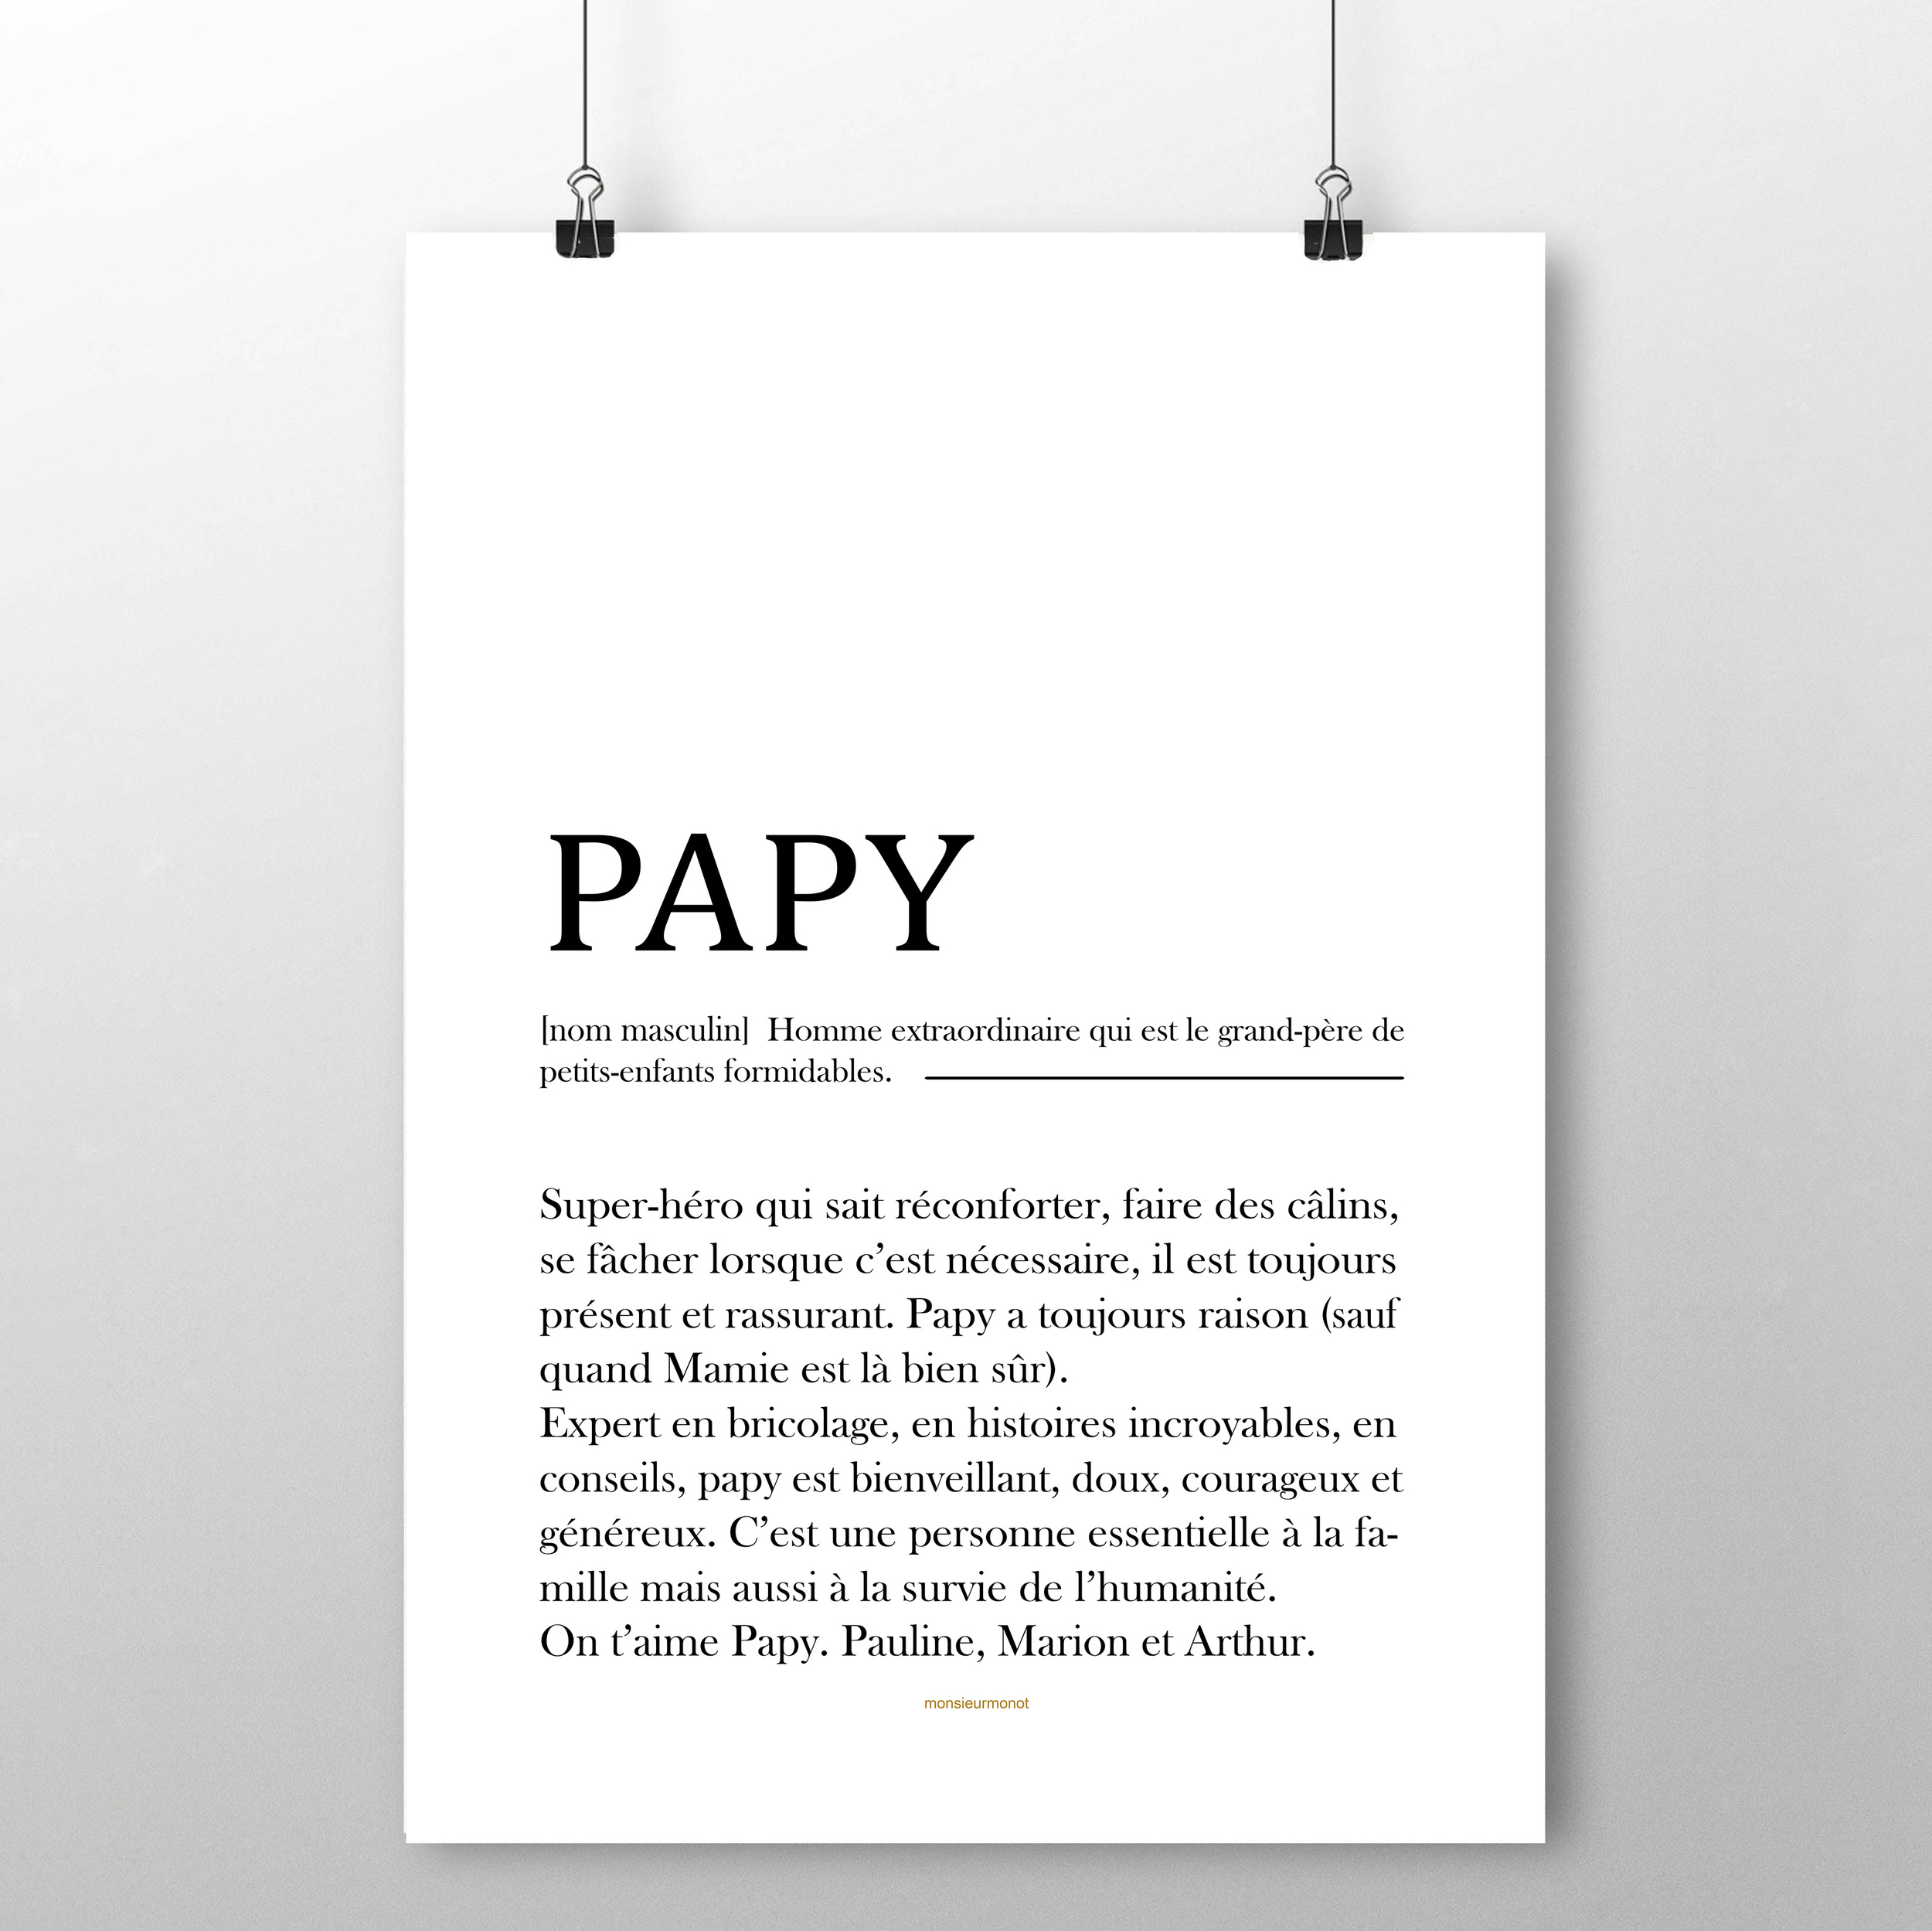 papy 2